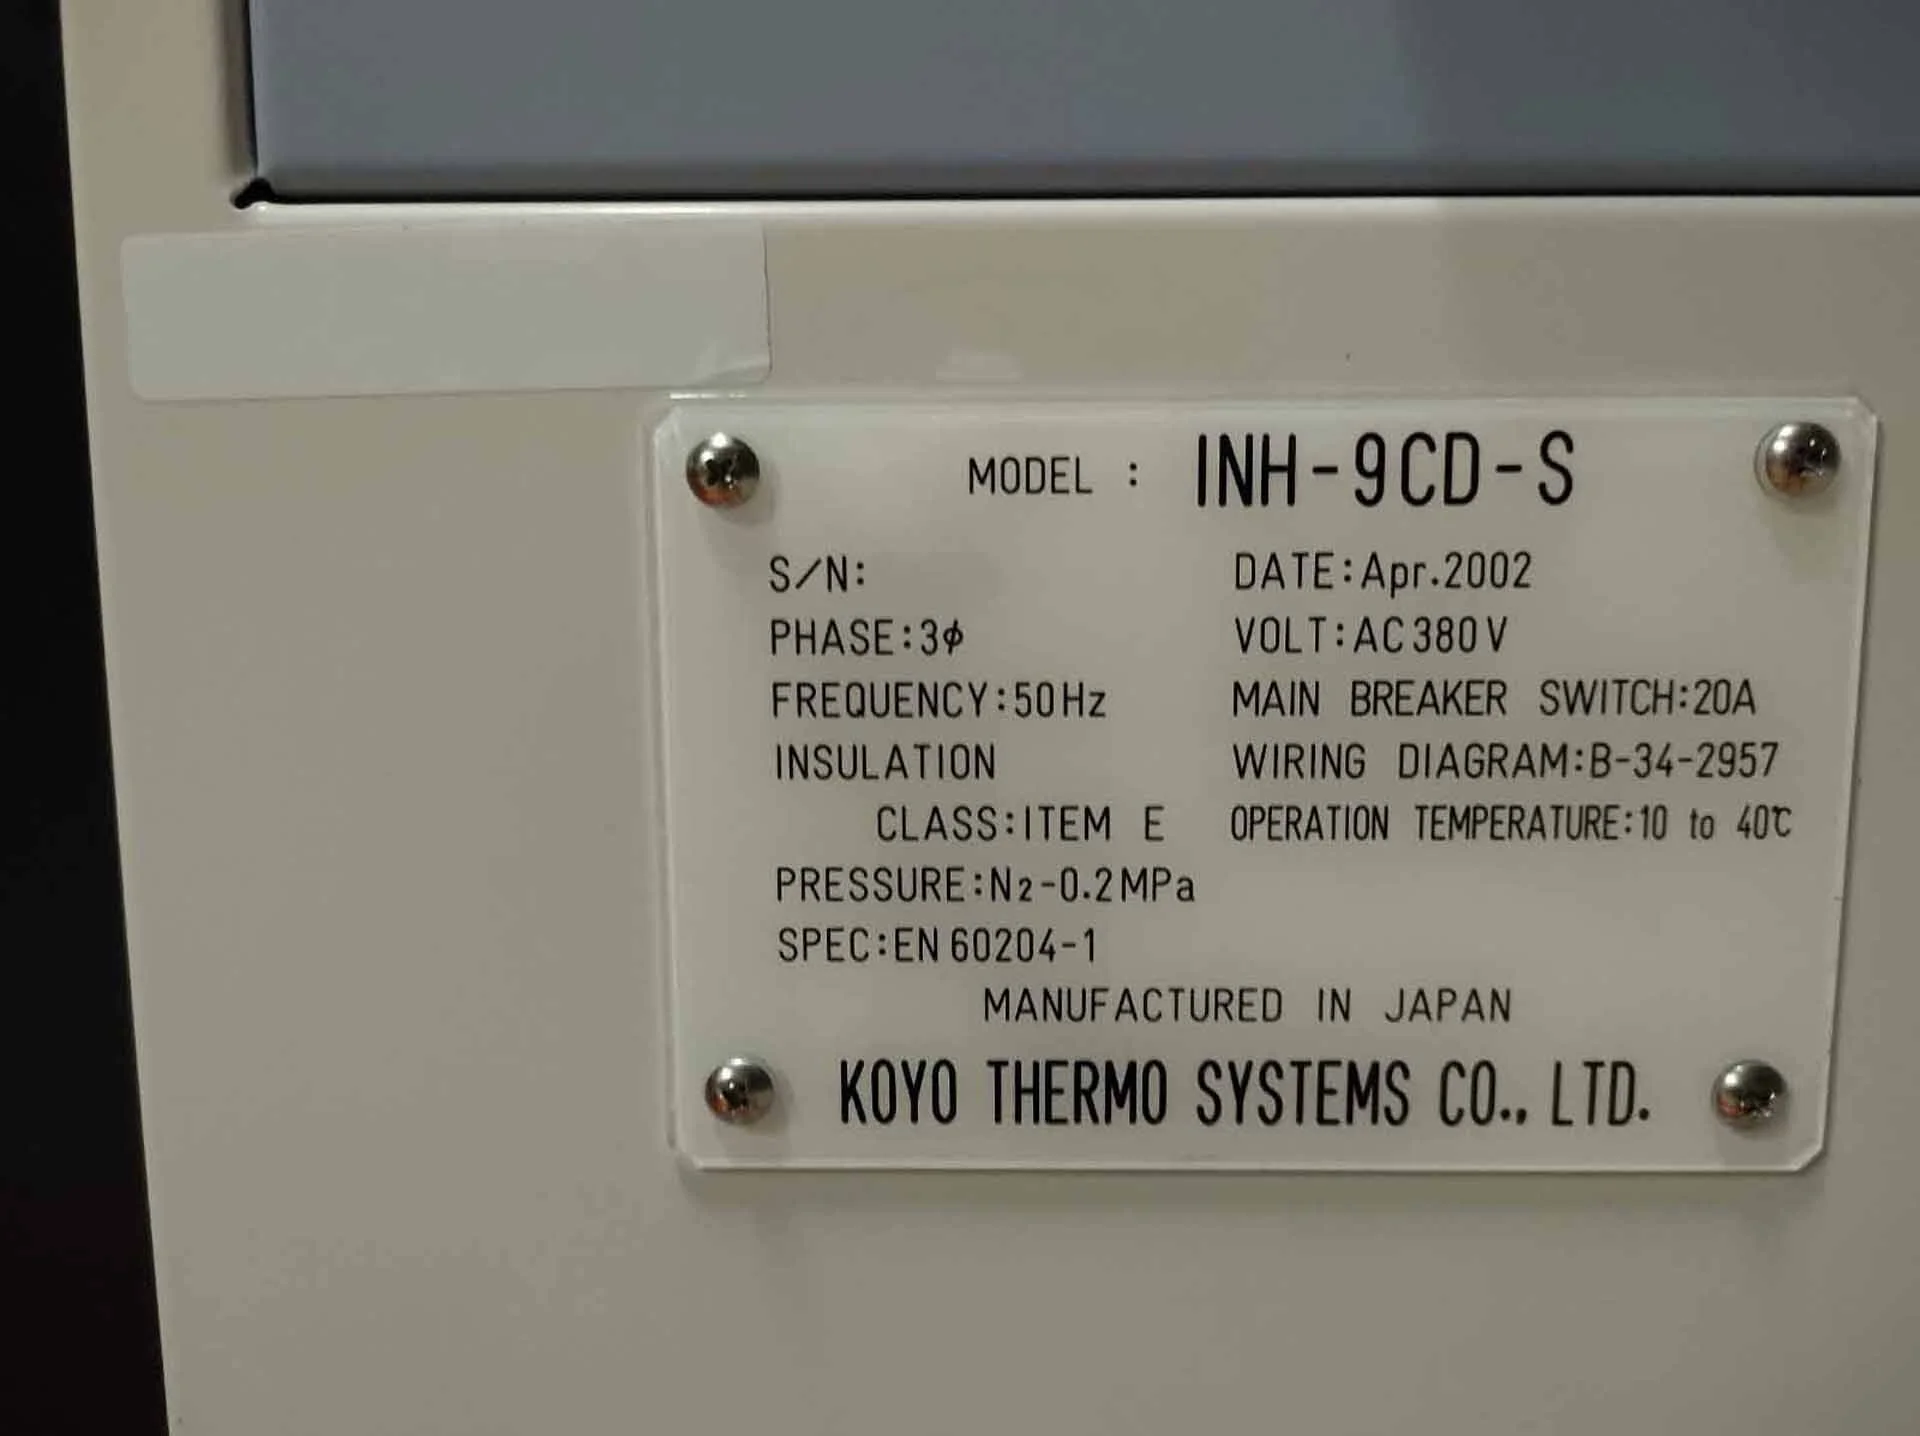 KOYO THERMO SYSTEMS INH-9CD-S オーブン／炉 はセール価格 #9401785